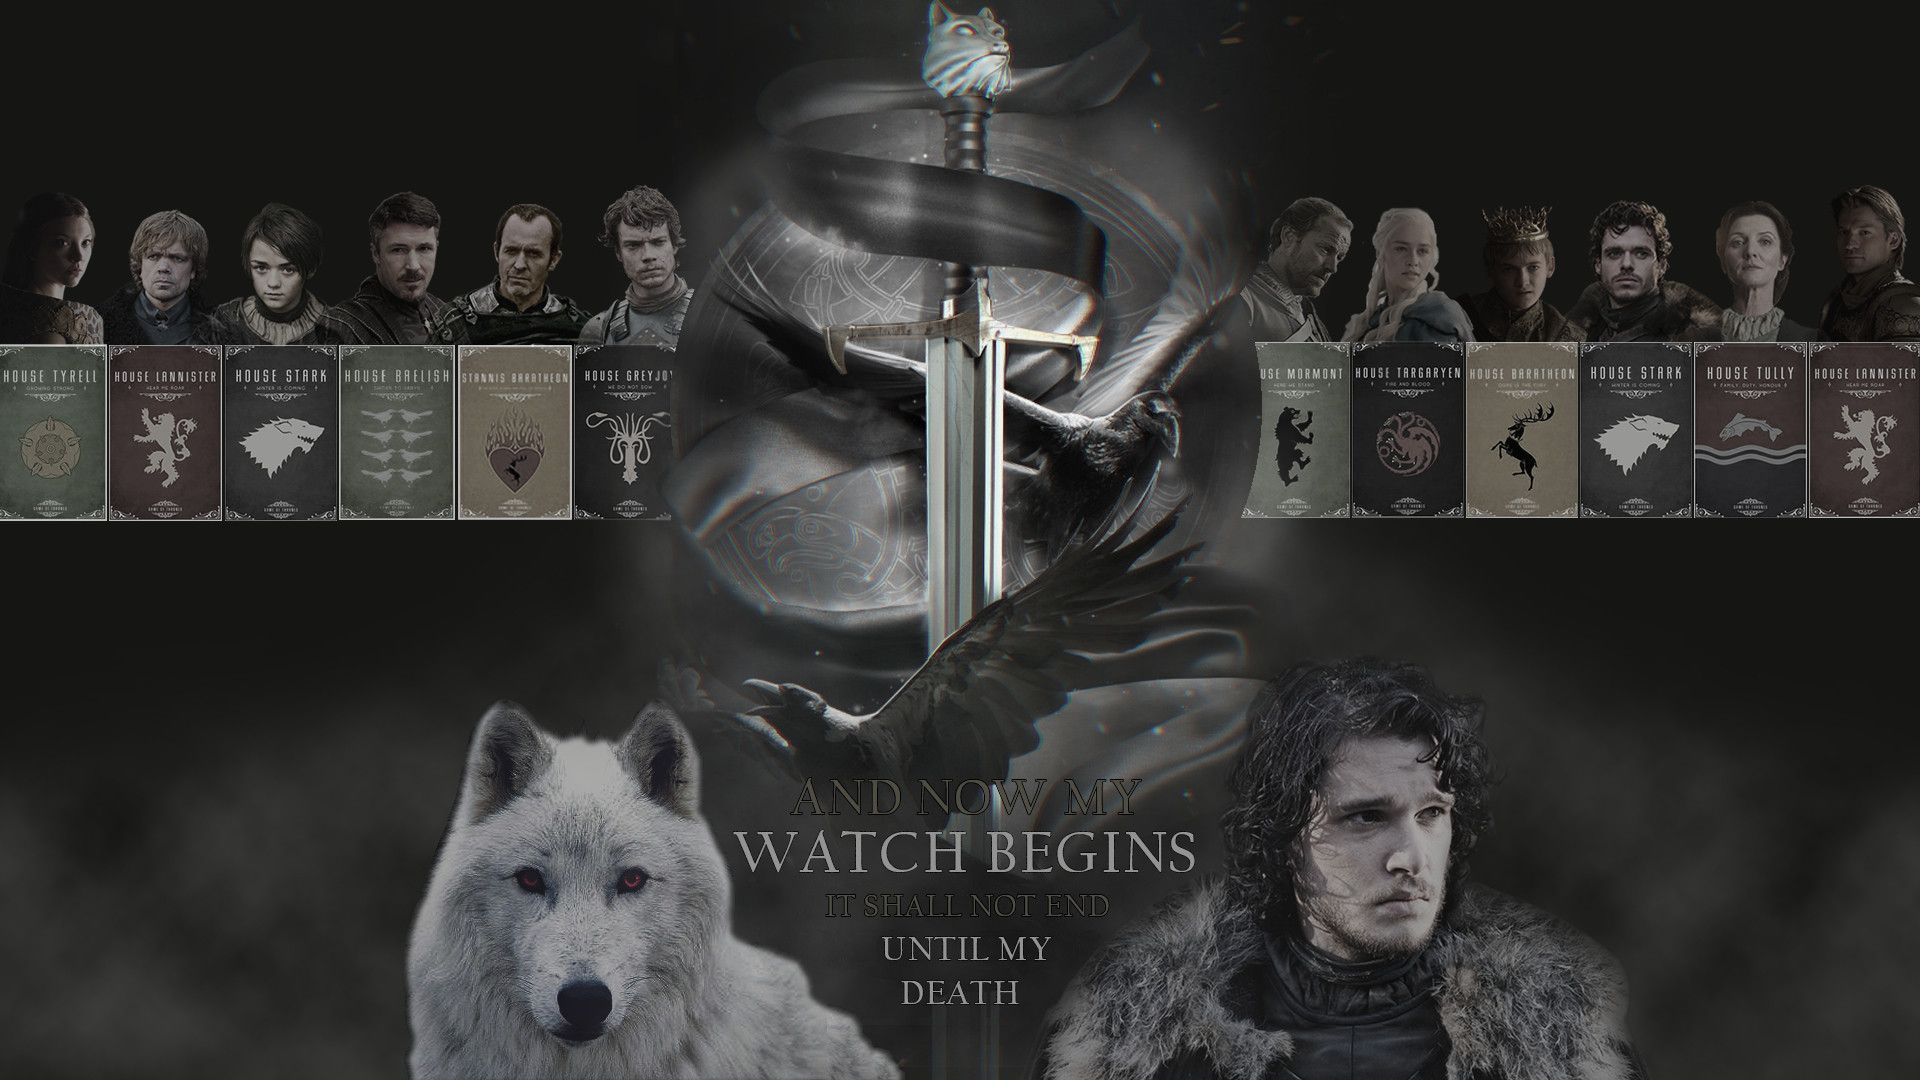 Cool HD Game of Thrones Poster Wallpaper. Game Of Thrones Wallpaper